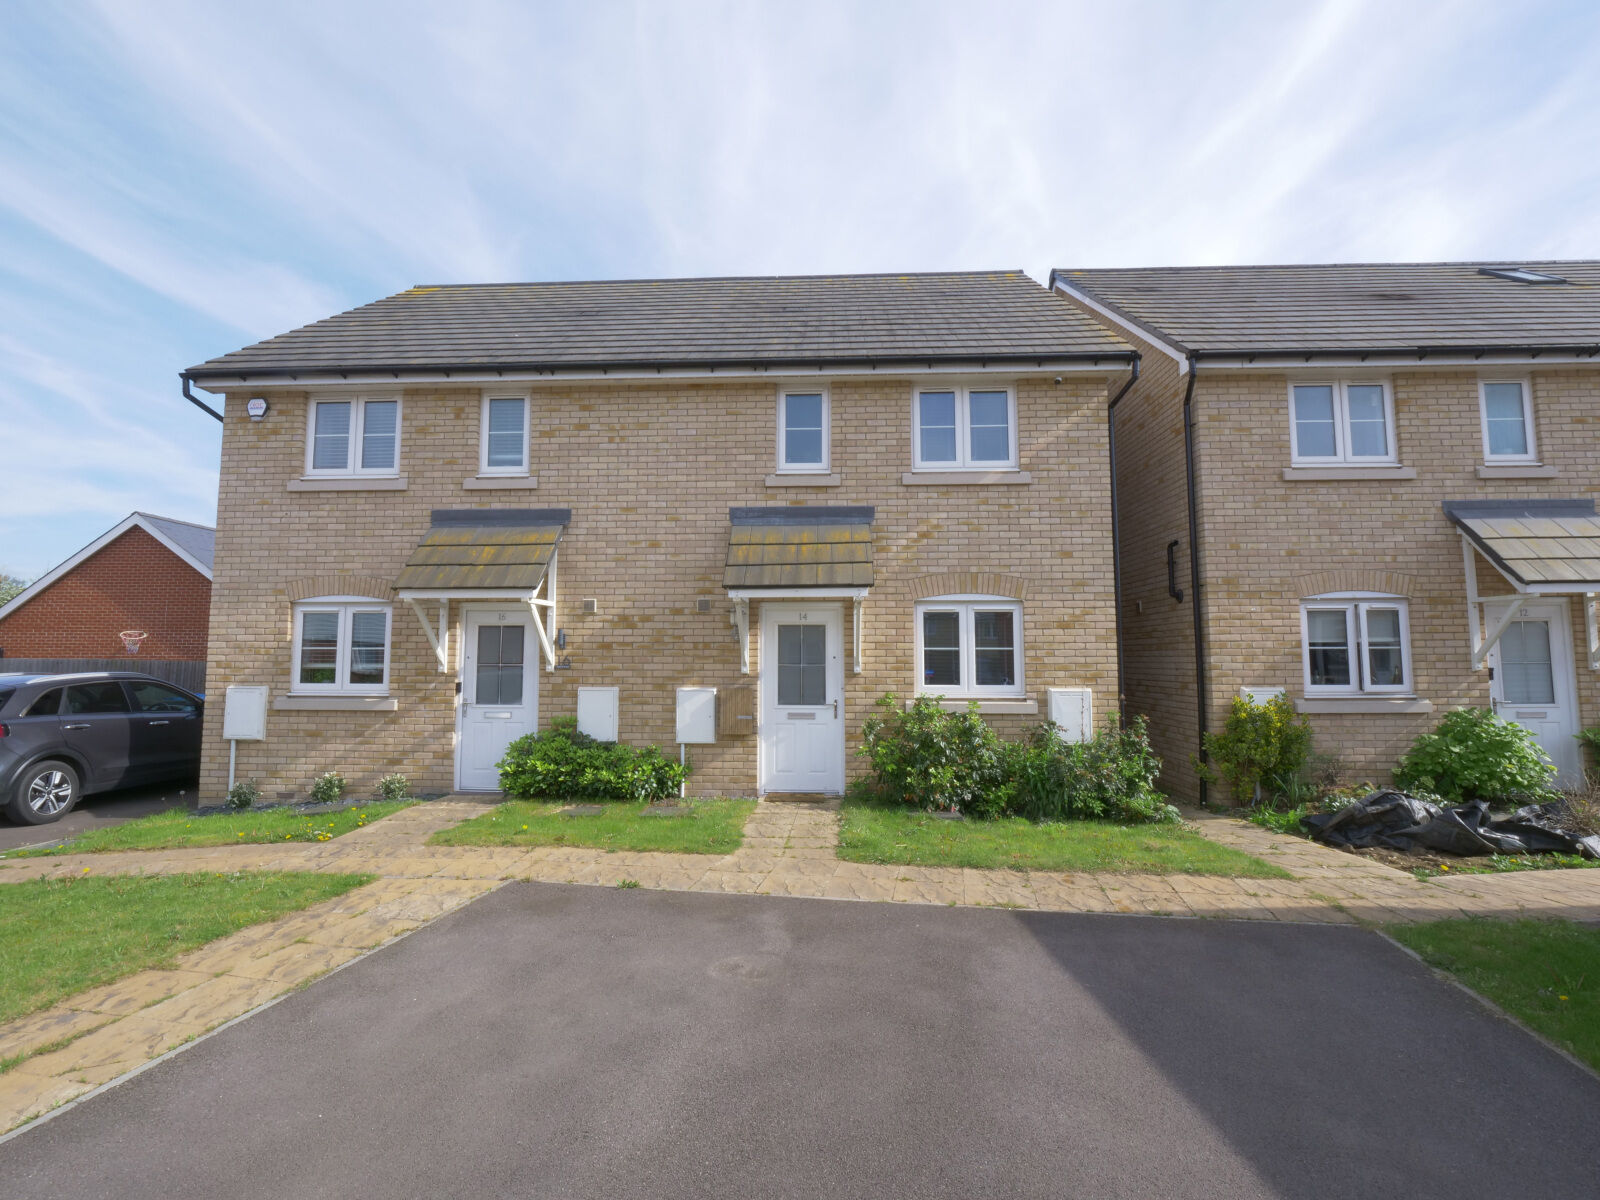 3 bedroom semi detached house for sale Wattle Road, Harlow, CM17, main image